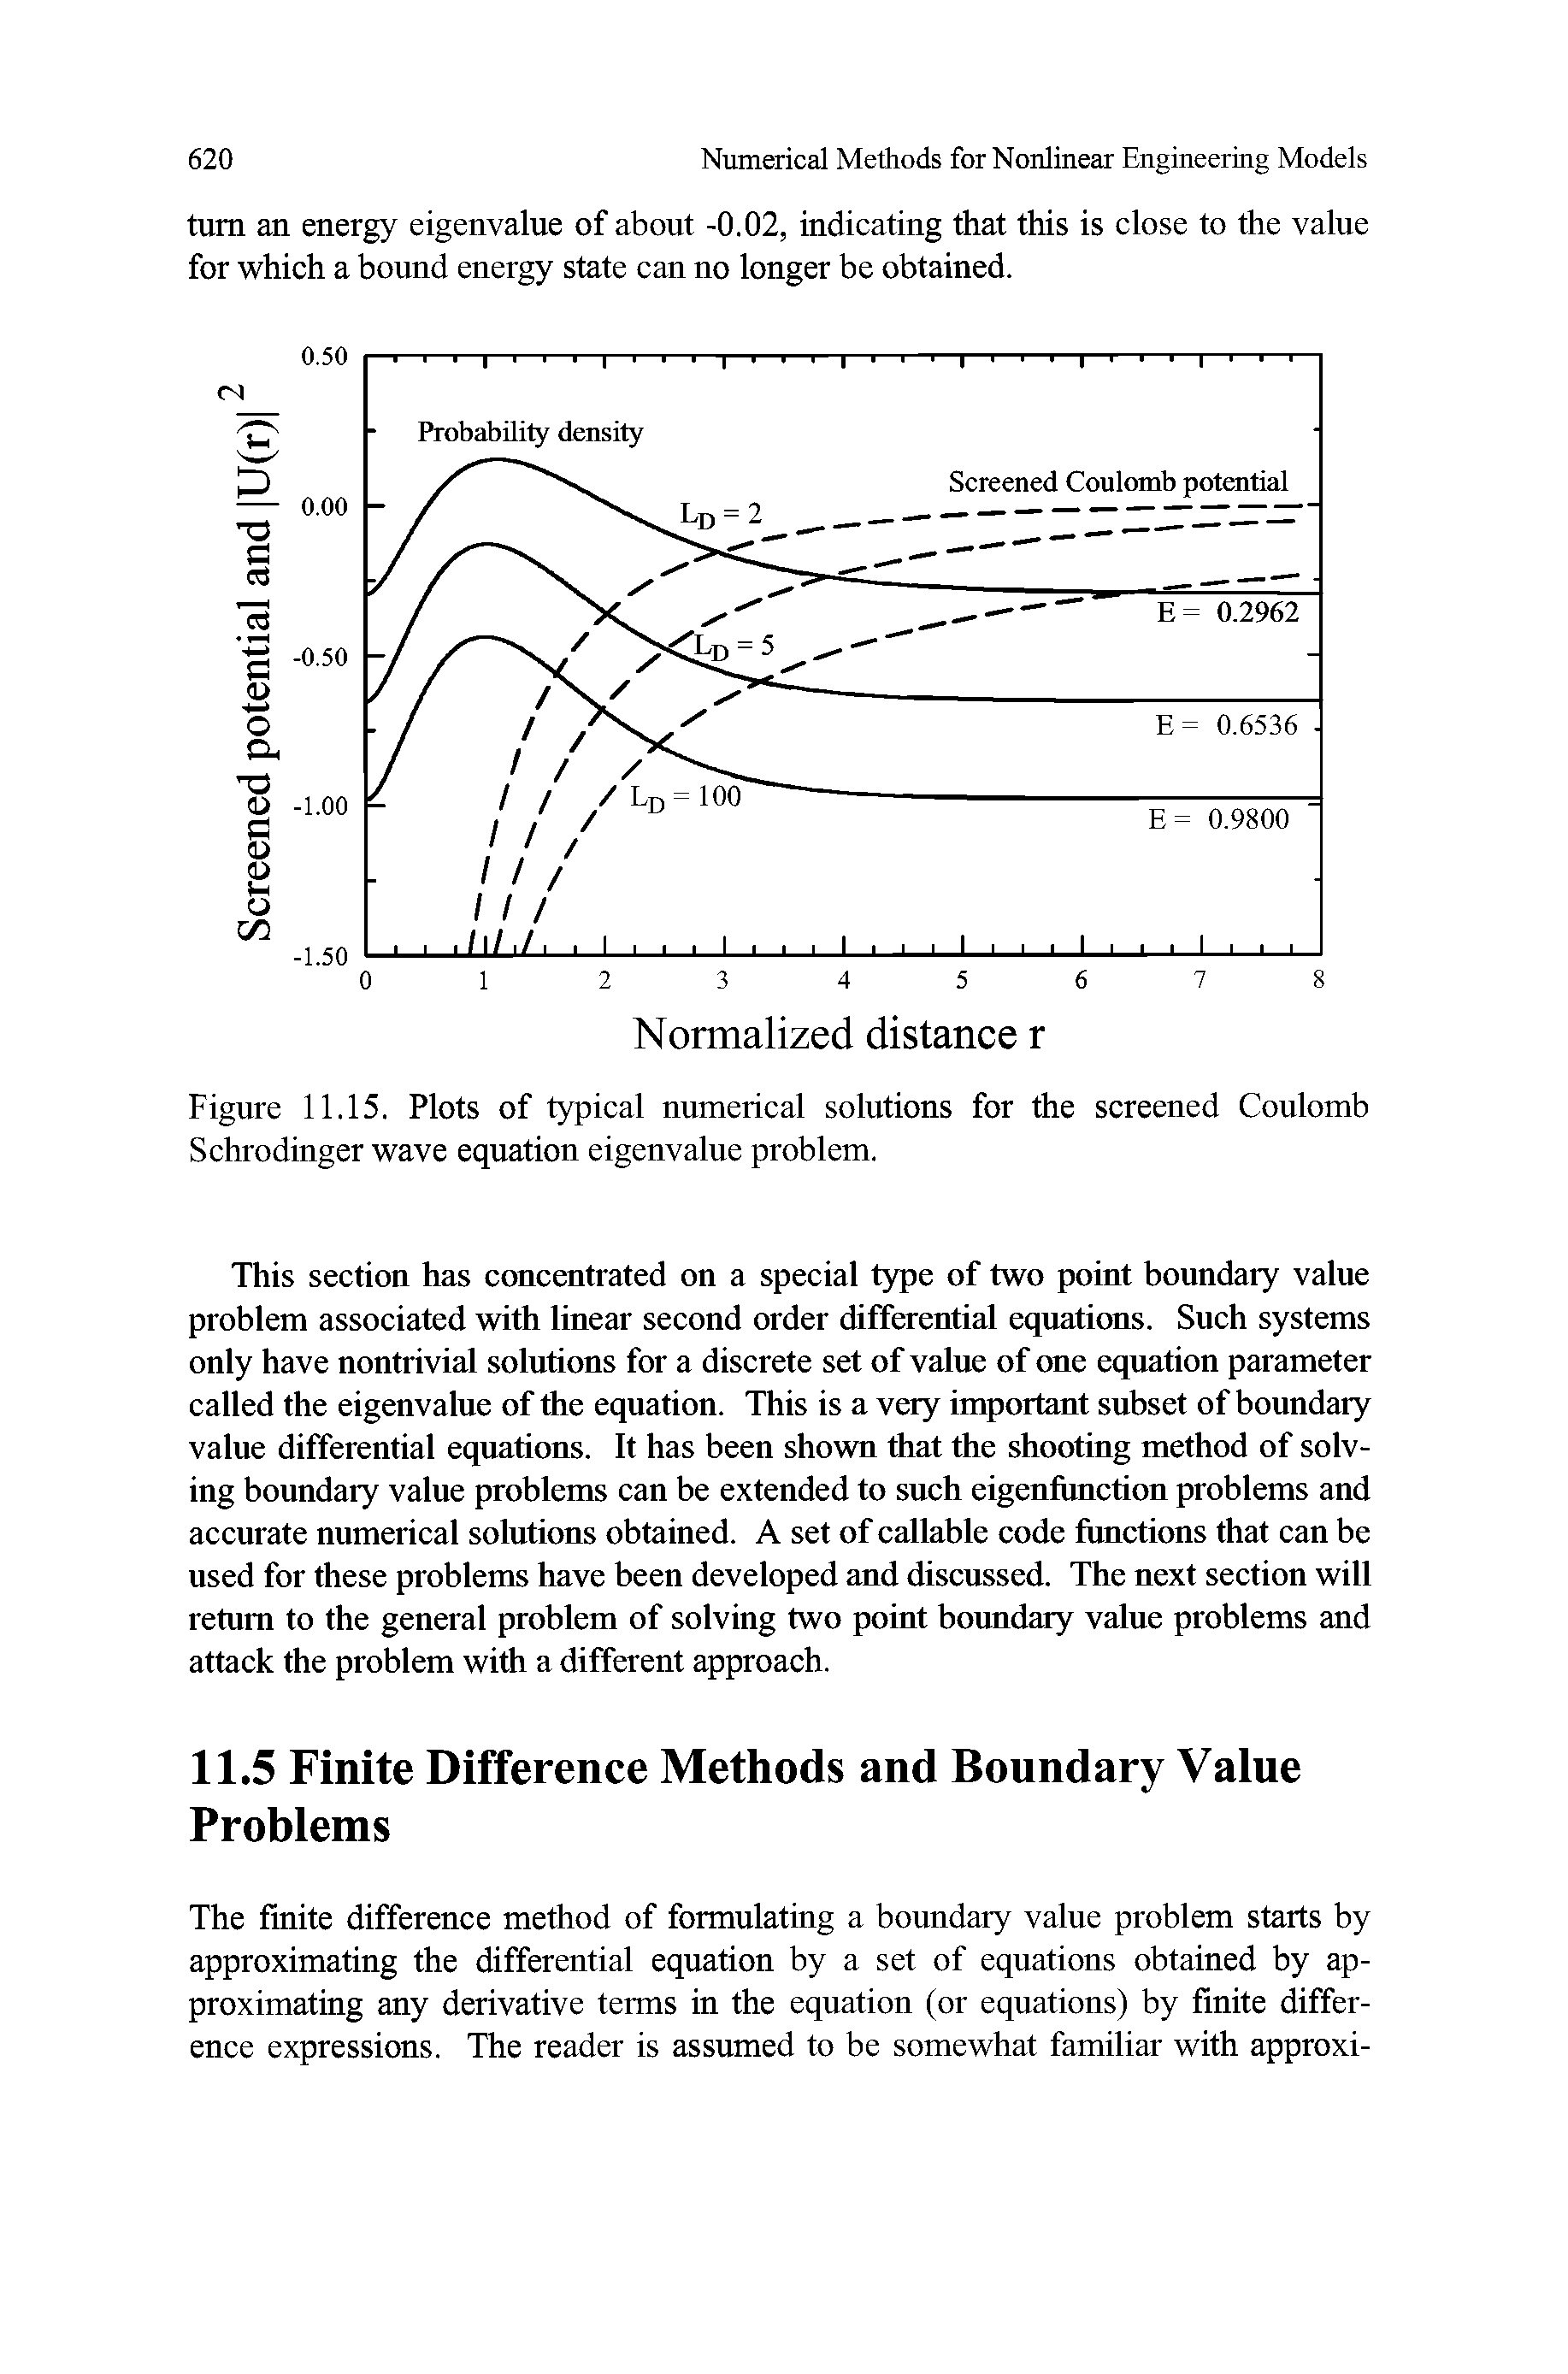 Figure 11.15. Plots of typical numerical solutions for the screened Coulomb Schrodinger wave equation eigenvalue problem.